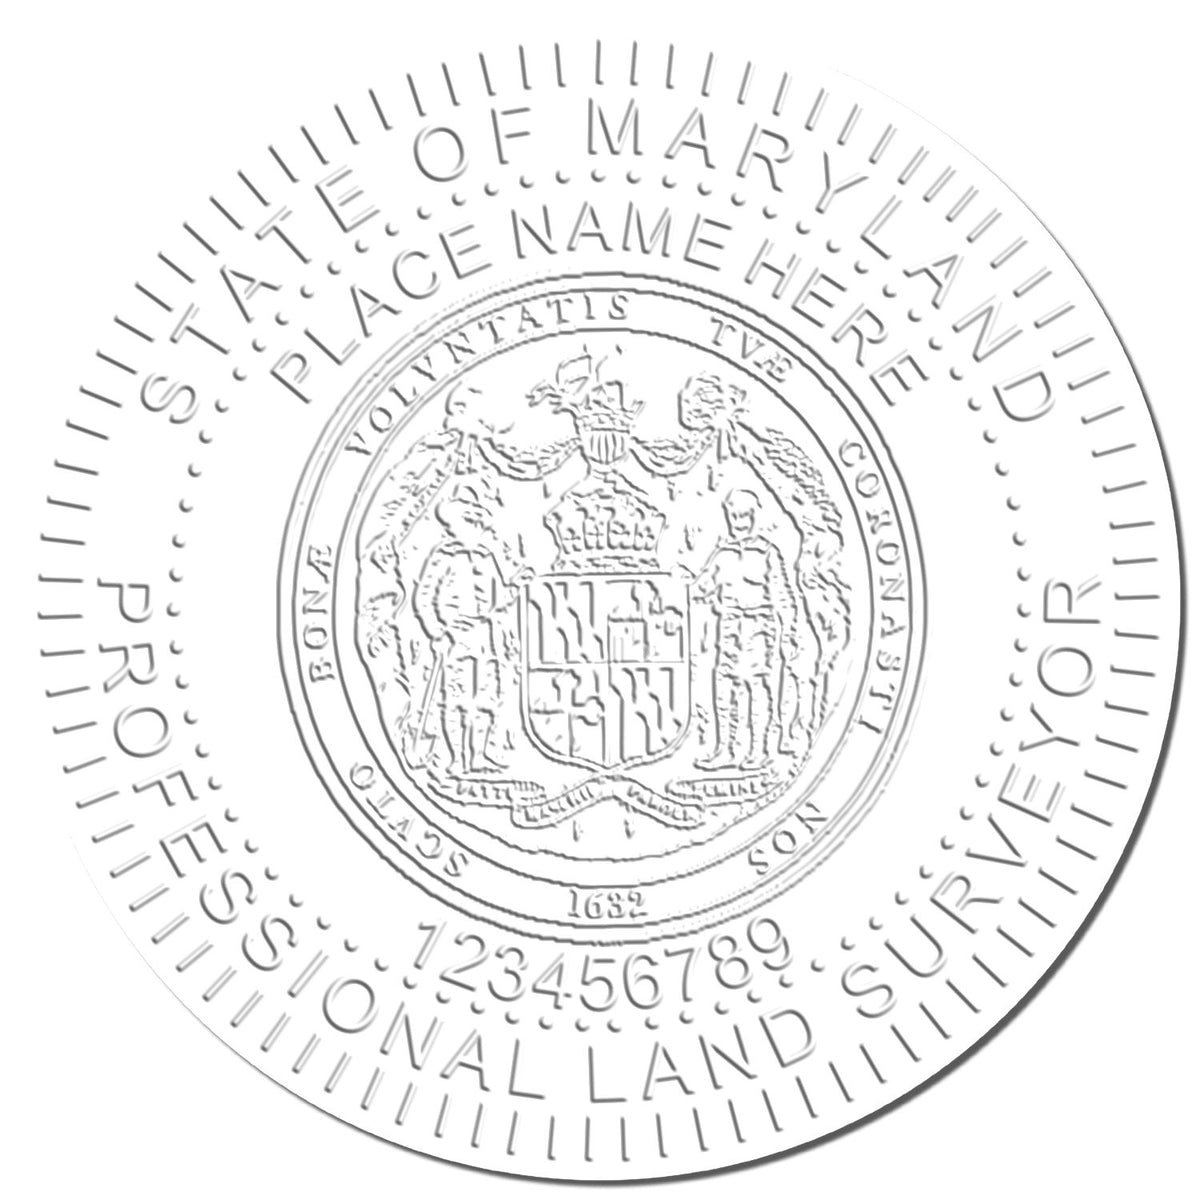 This paper is stamped with a sample imprint of the Hybrid Maryland Land Surveyor Seal, signifying its quality and reliability.